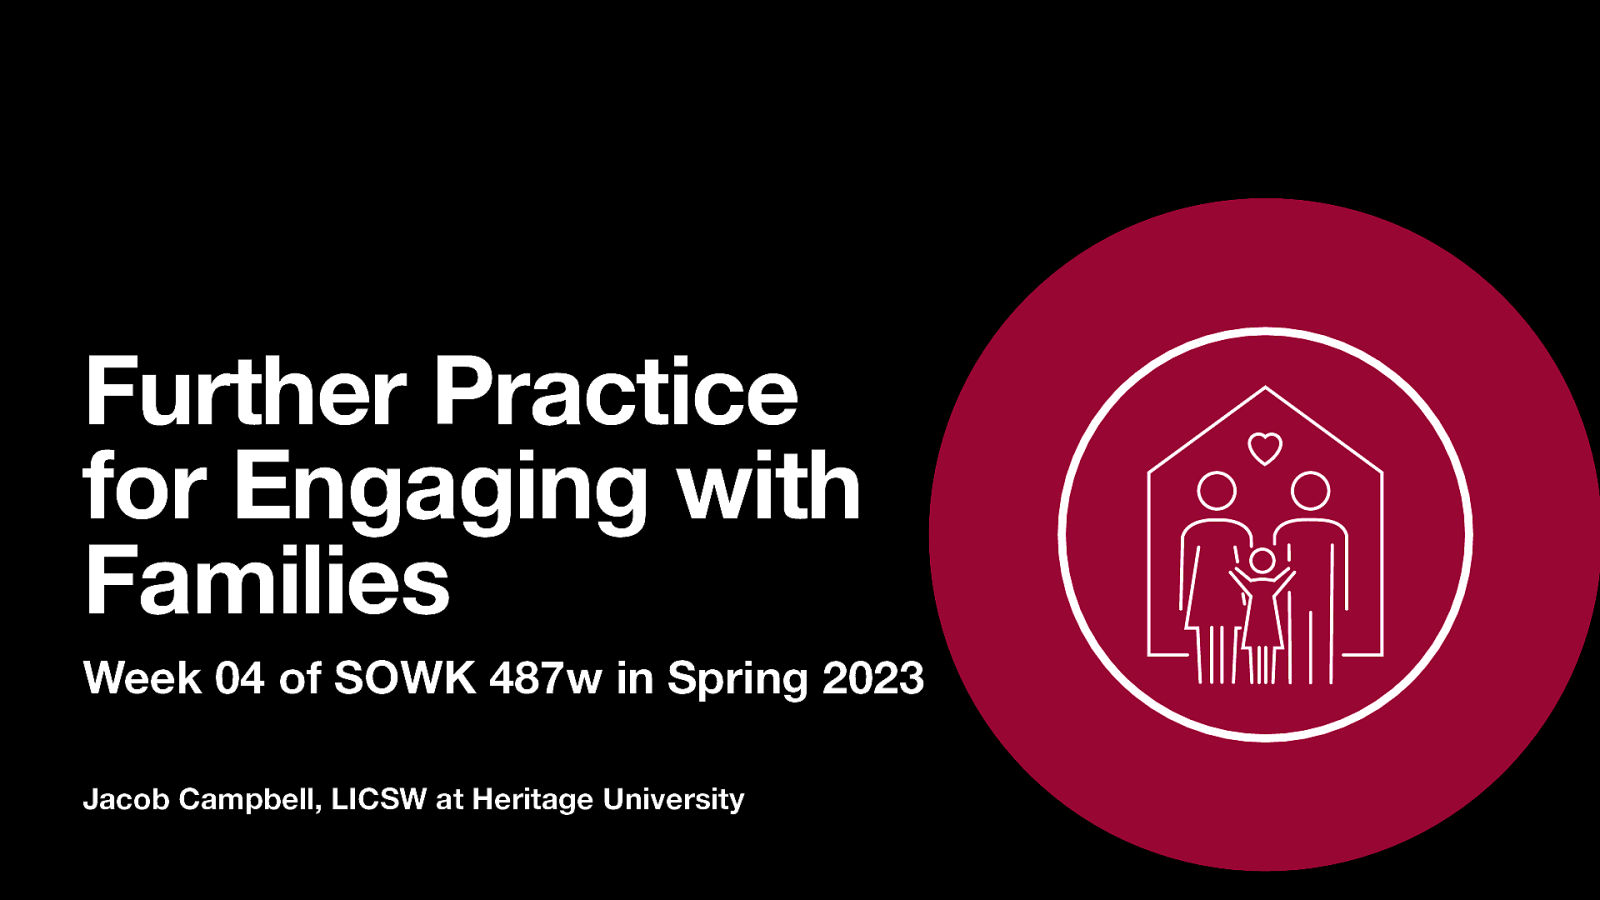 Spring 2023 SOWK 487w Week 04: Further Practices for Engaging with Families